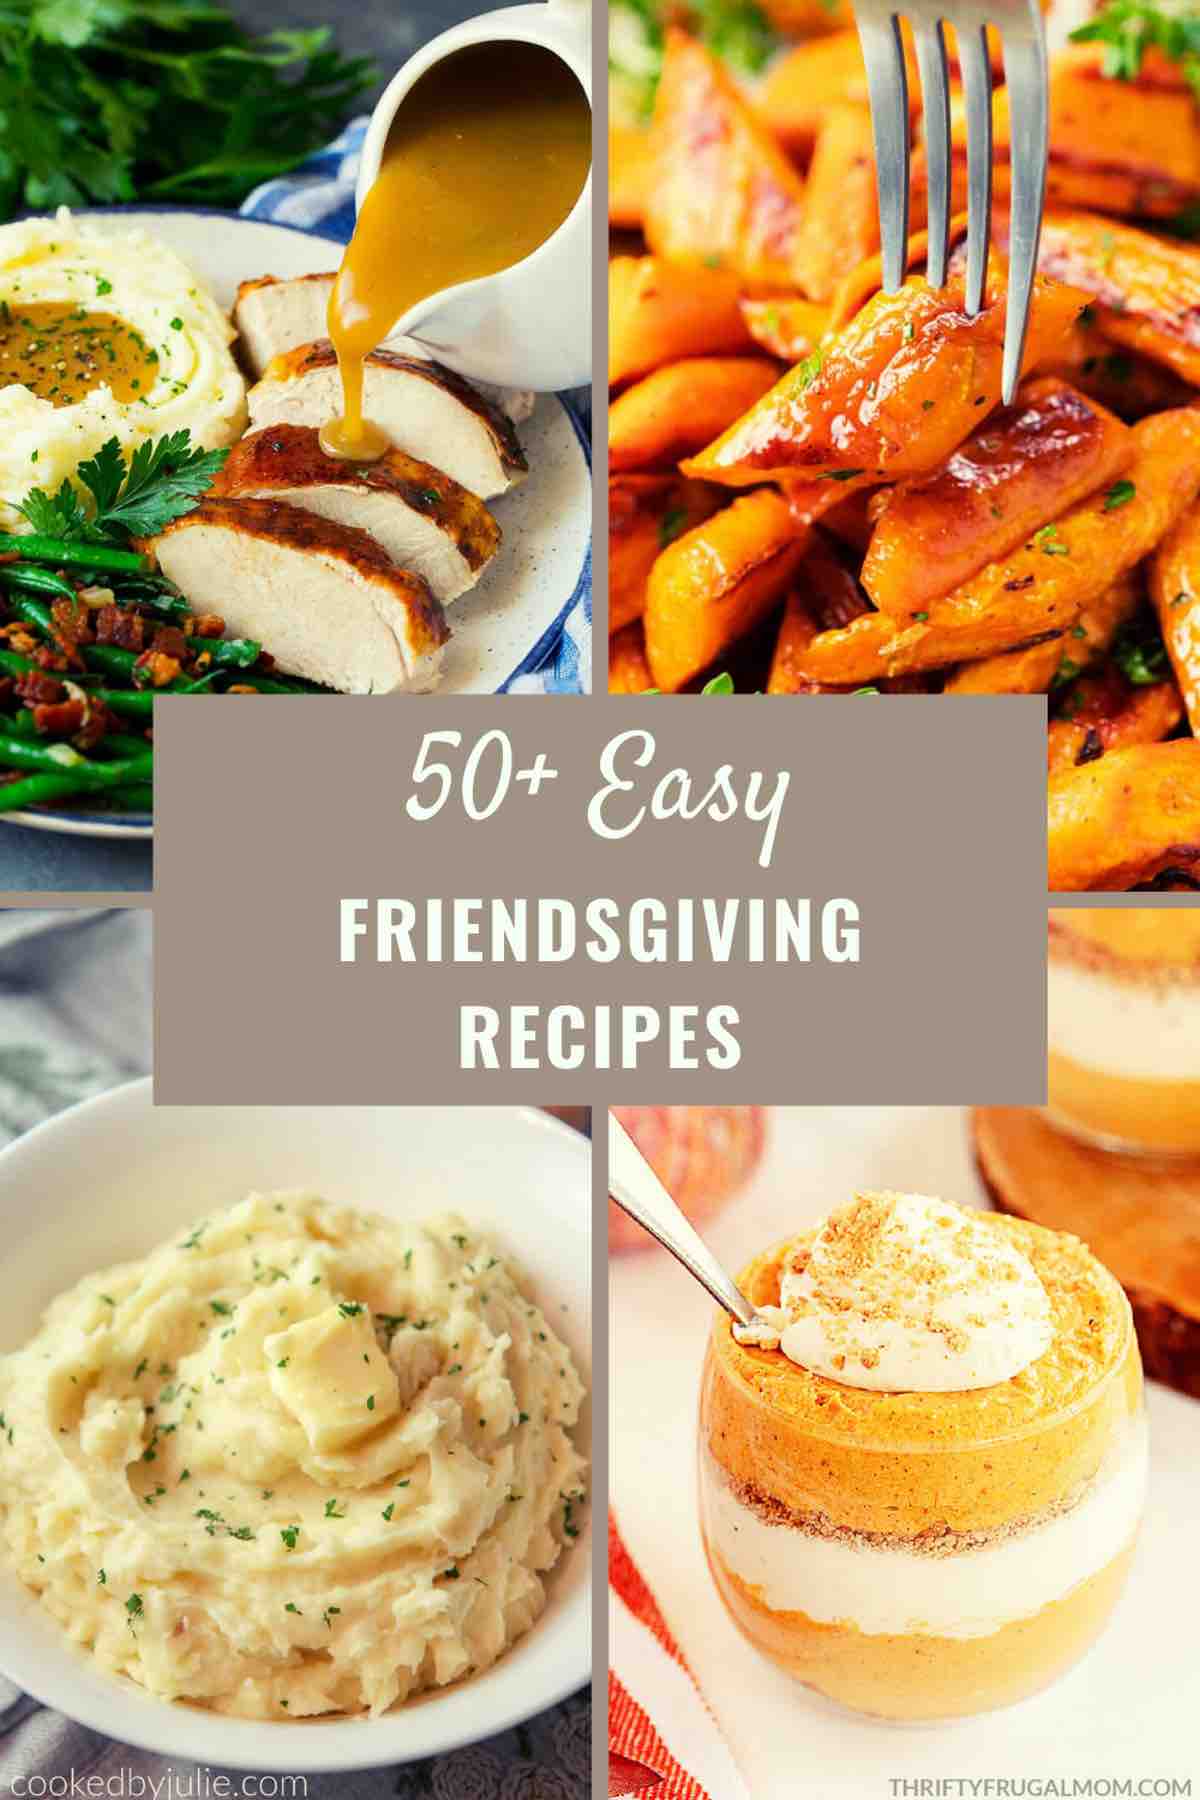 A collection of over 50 easy Friendsgiving recipes to bring to potlucks or enjoy with close friends and family.